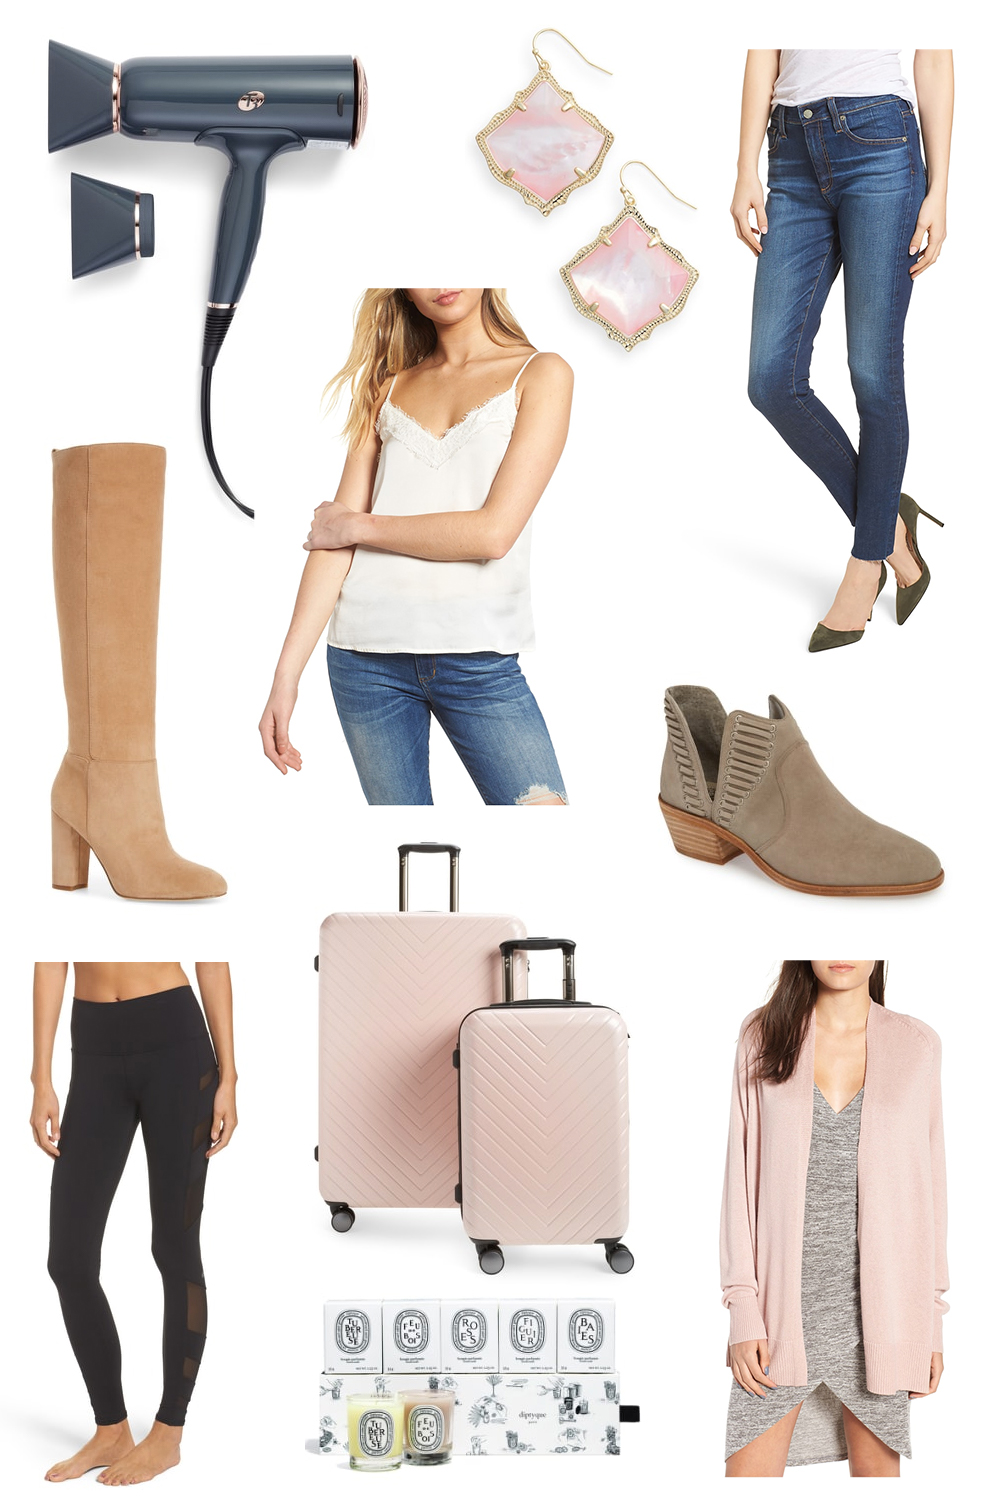 Top Nordstrom Anniversary Sale 2018 Picks by southern fashion blogger Stephanie Ziajka from Diary of a Debutante, nordstrom anniversary sale 2018 top sellers, top picks nordstrom anniversary sale 2018, nordstrom anniversary sale barefoot dreams, nordstrom anniversary sale 2018 early access